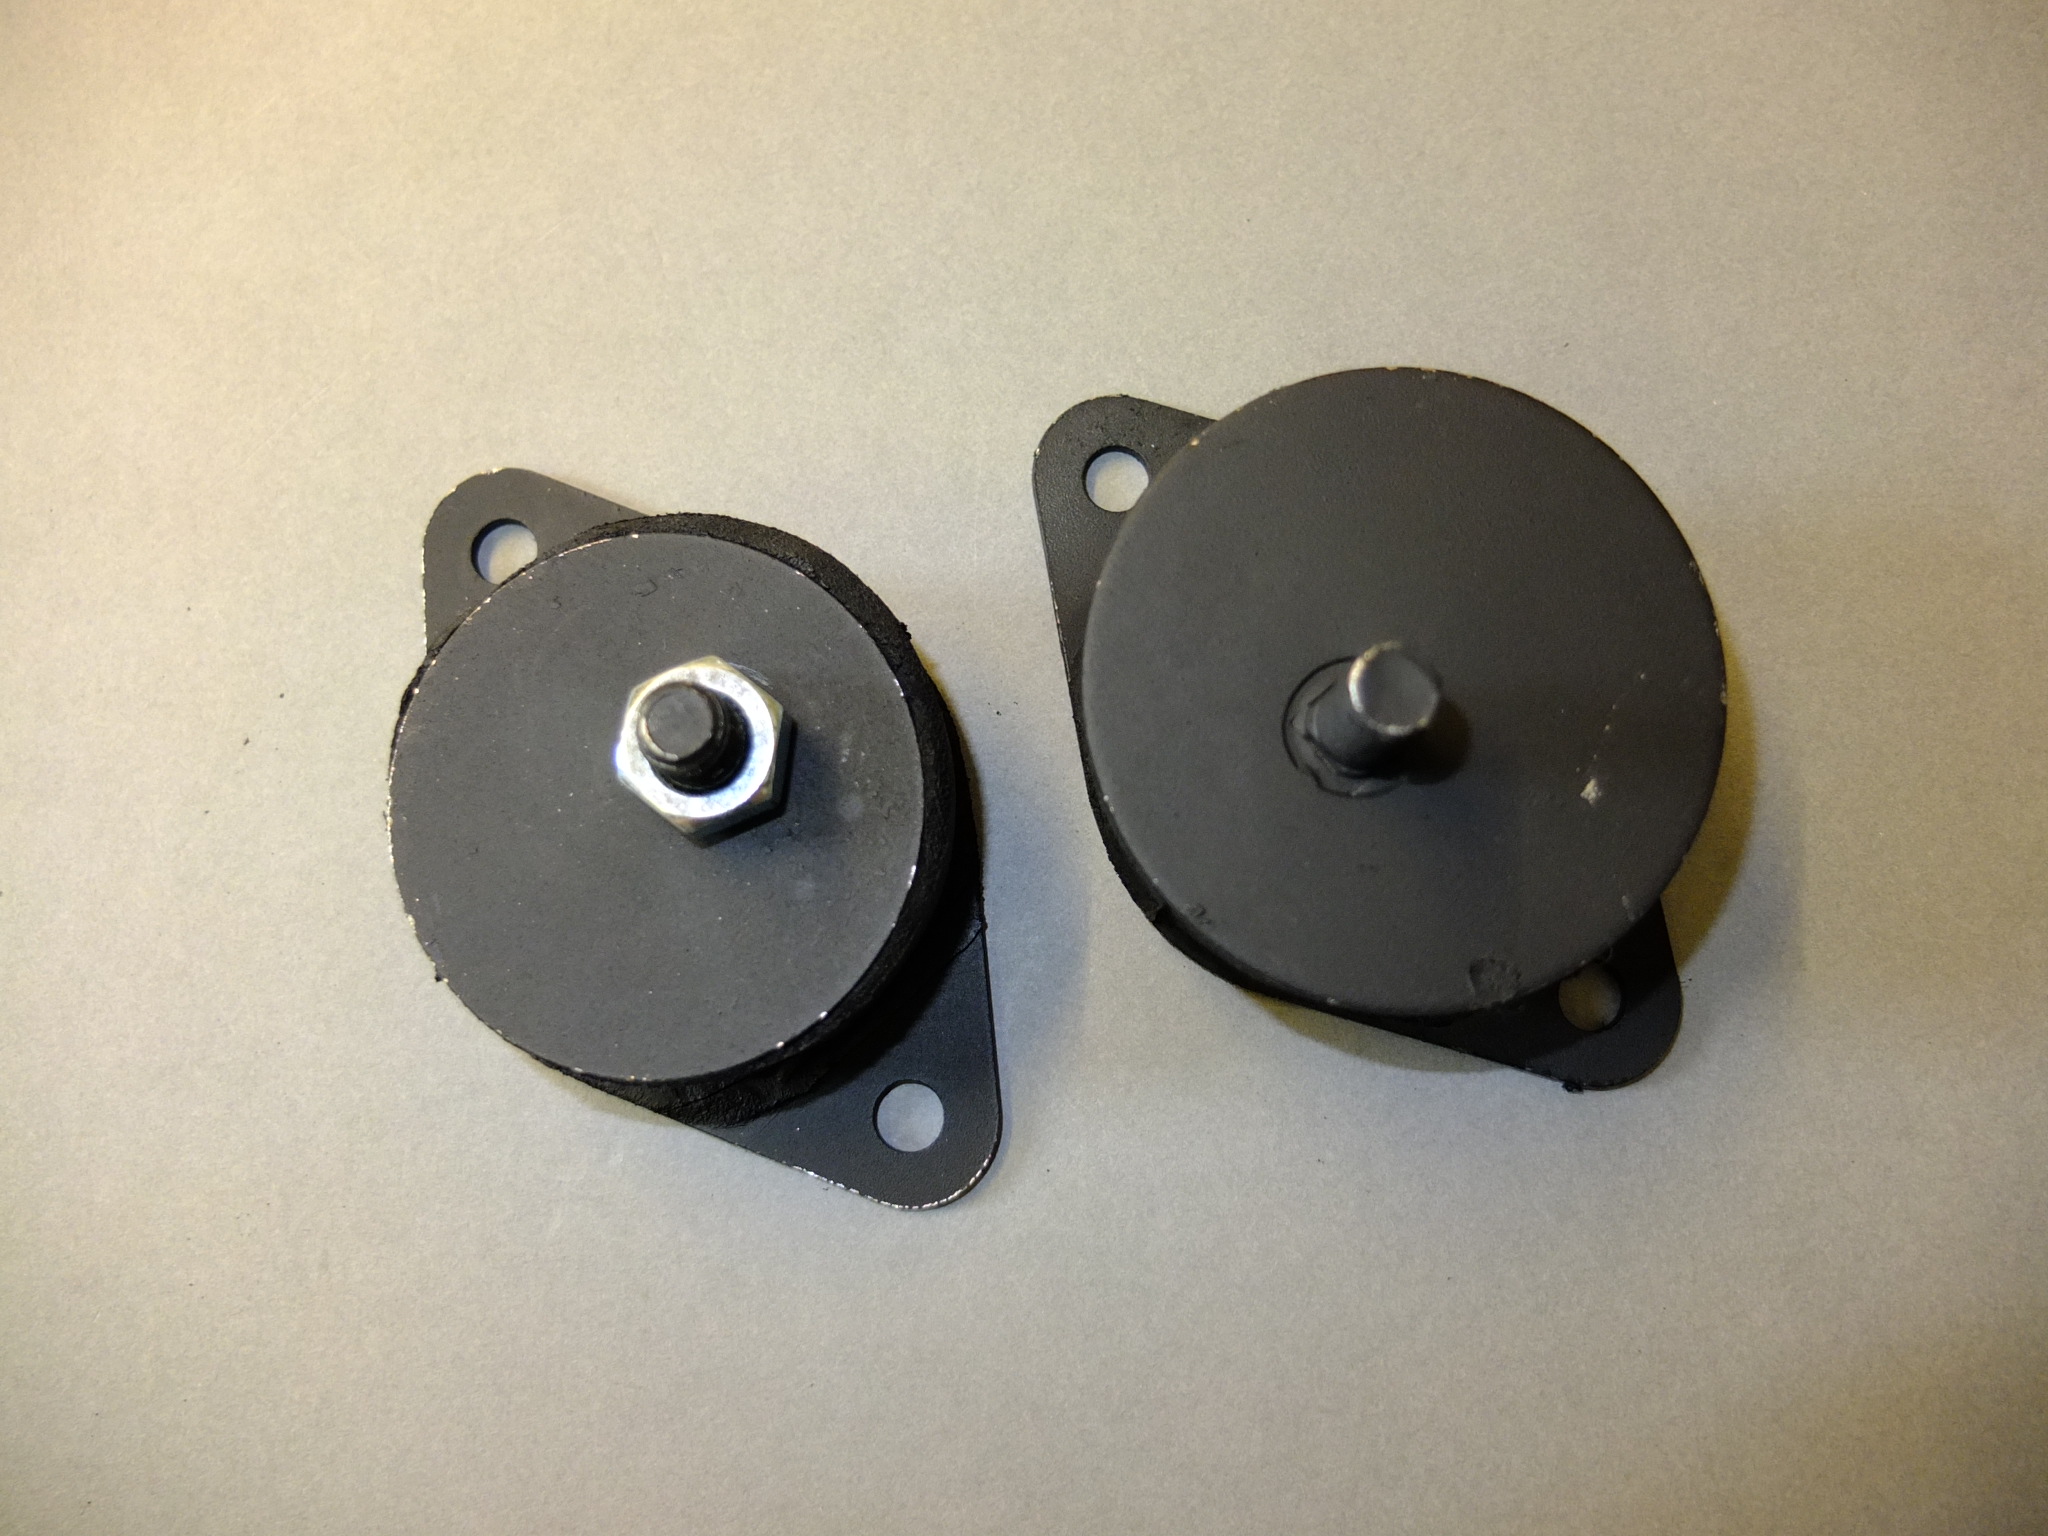 RV8 Rubber engine mounts (left) - MG V8 and MG RV8 car parts